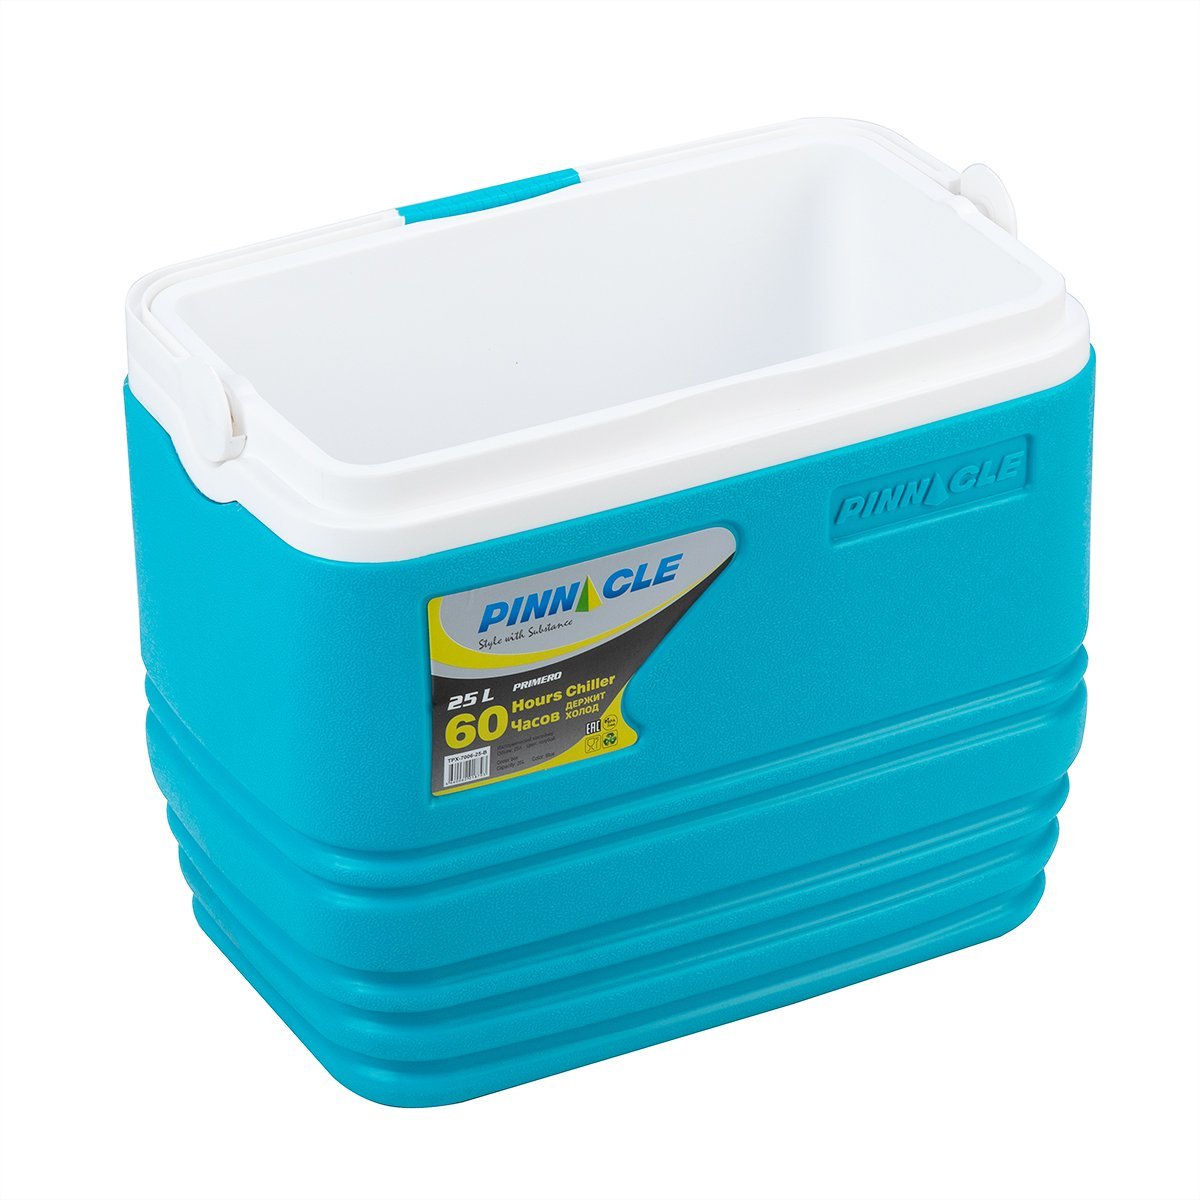 Primero Portable Camping Ice Chest with Lid Cup Holders, 26 qt with a lid widely open